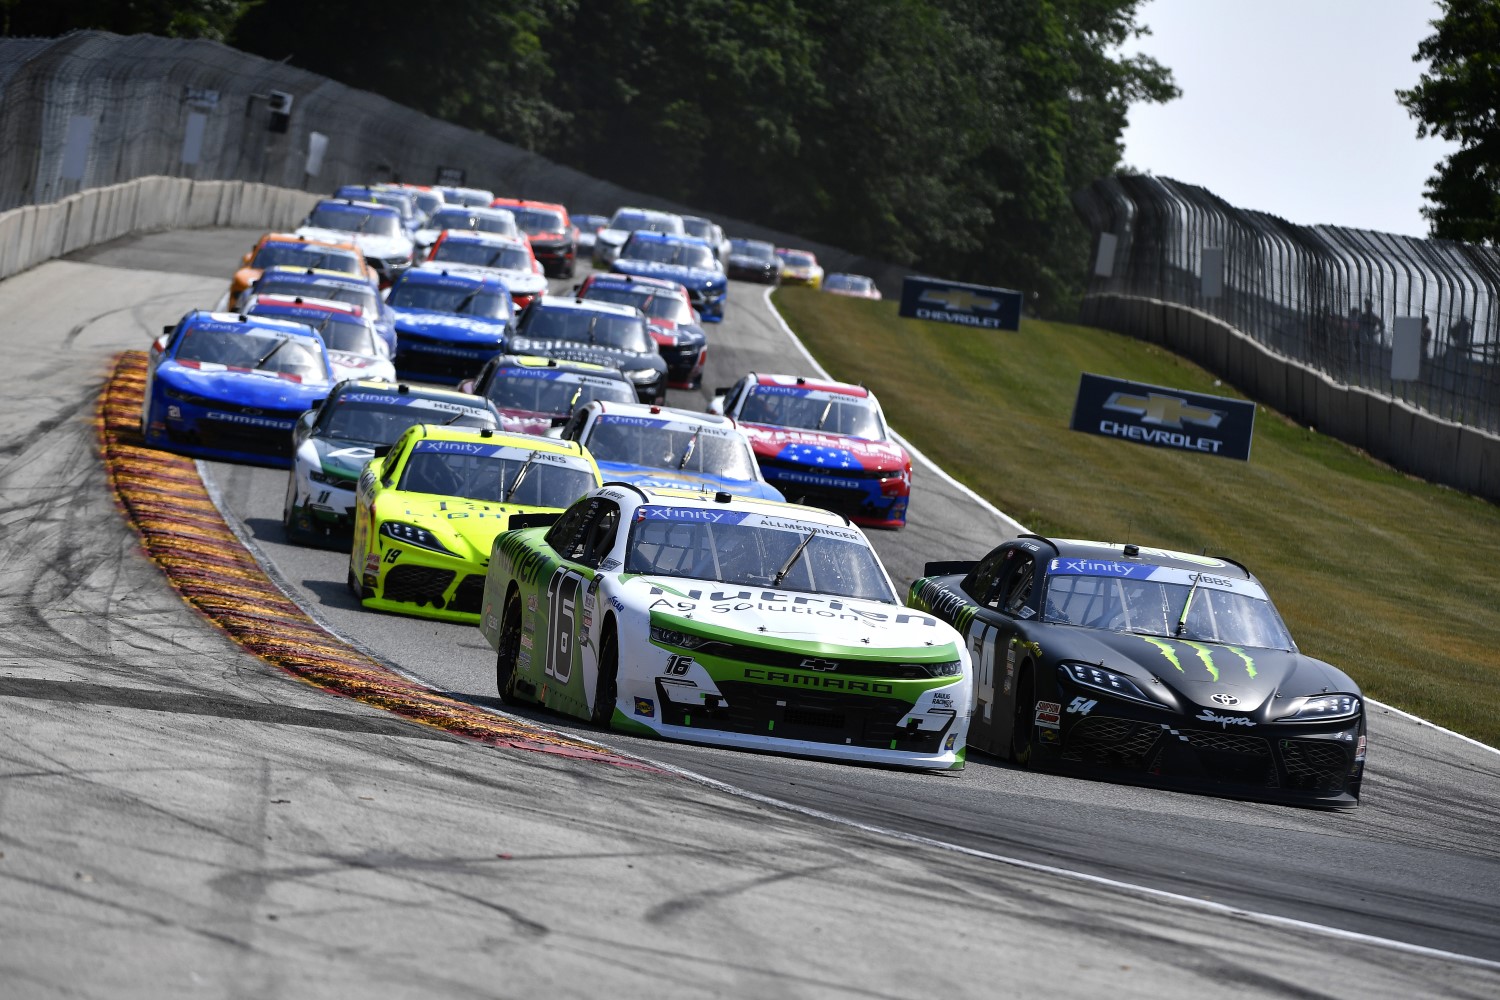 Road America - JULY 02: AJ Allmendinger, driver of the #16 Nutrien Ag Solutions Chevrolet, and Ty Gibbs, driver of the #54 Monster Energy Toyota, race during the NASCAR Xfinity Series Henry 180 at Road America on July 02, 2022 in Elkhart Lake, Wisconsin. (Photo by Logan Riely/Getty Images)